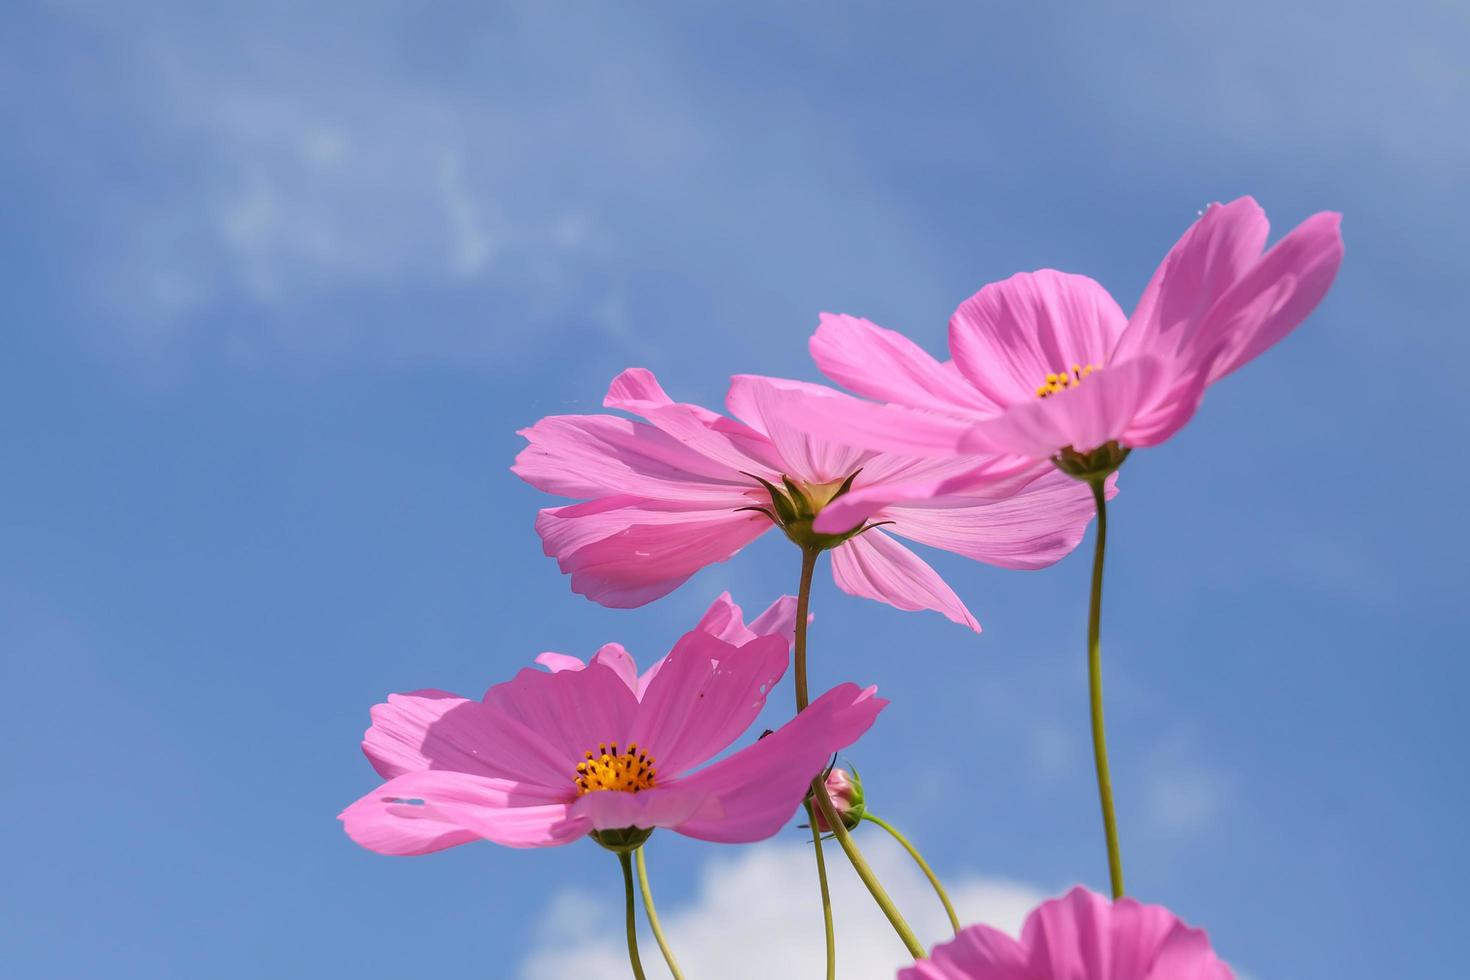 Low Angle View Of pink cosmos Flowering Plants Against Blue Sky photo